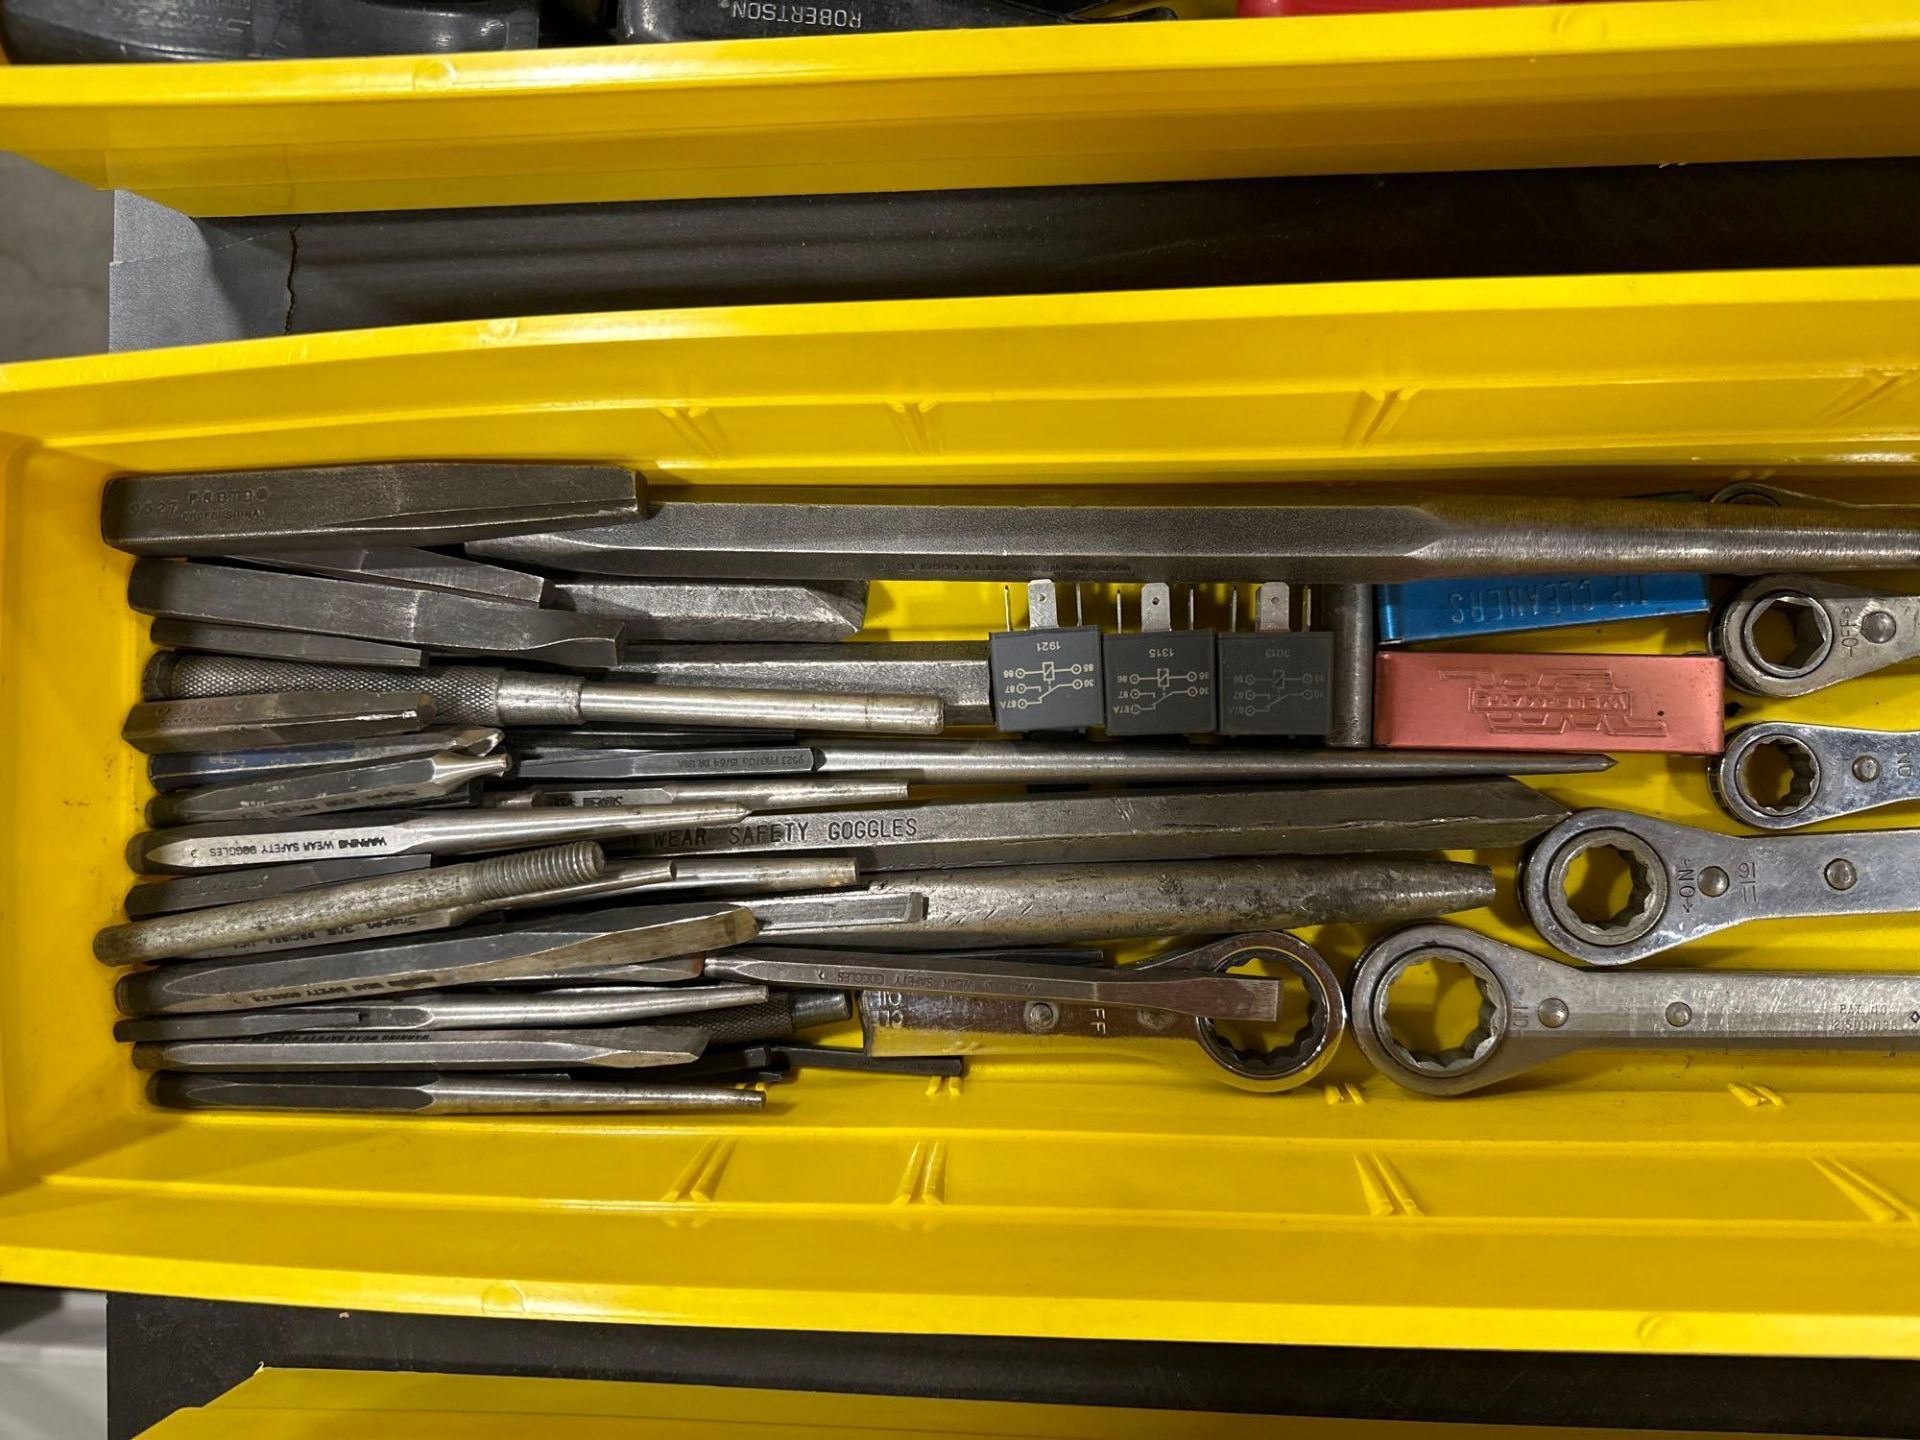 Lot of Asst. Ratchet Wrenches, Punches, etc. - Image 5 of 5